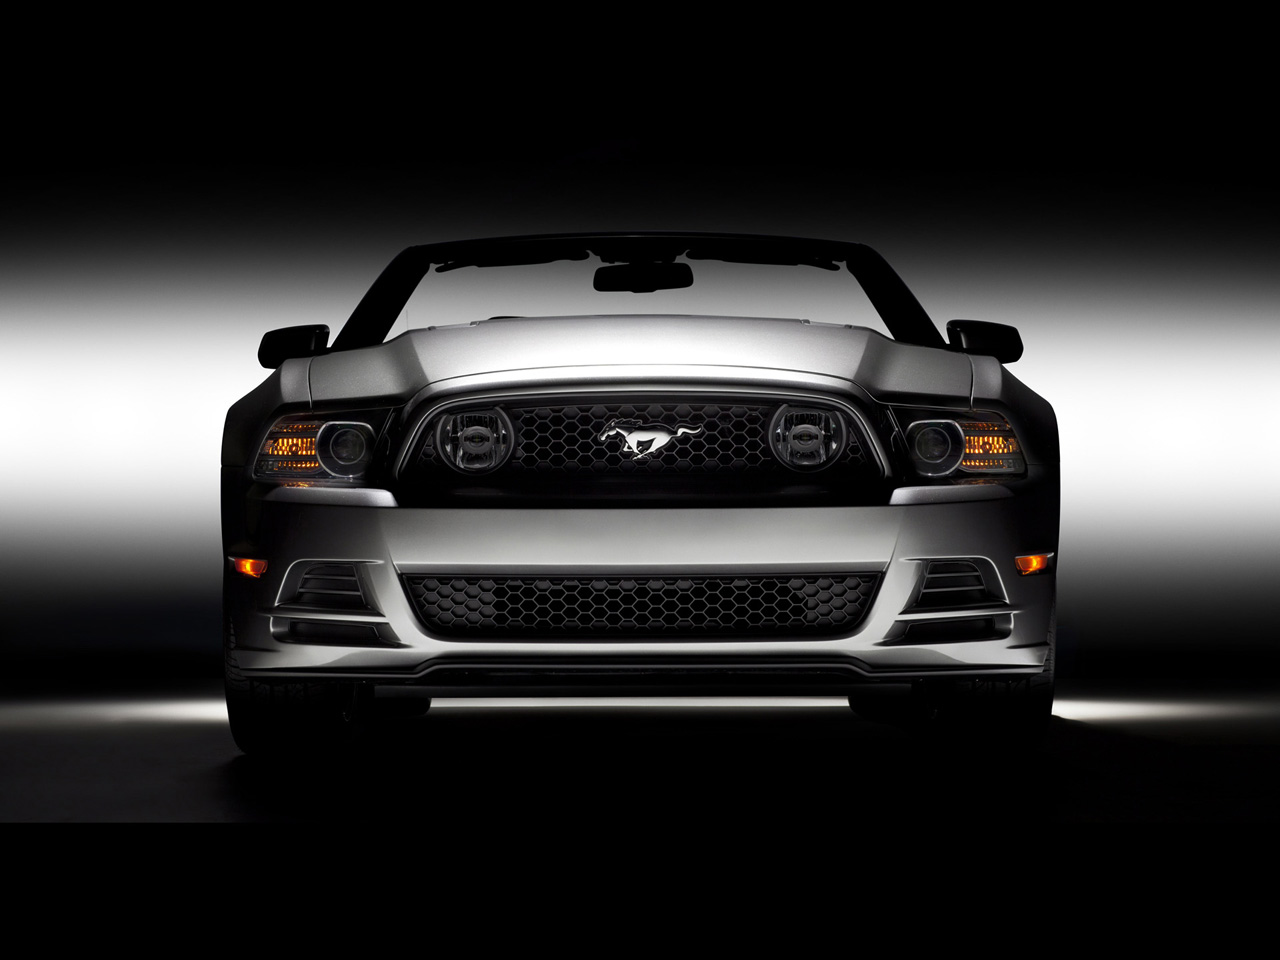 Ford Mustang Gt Wallpaper HD In Cars Imageci